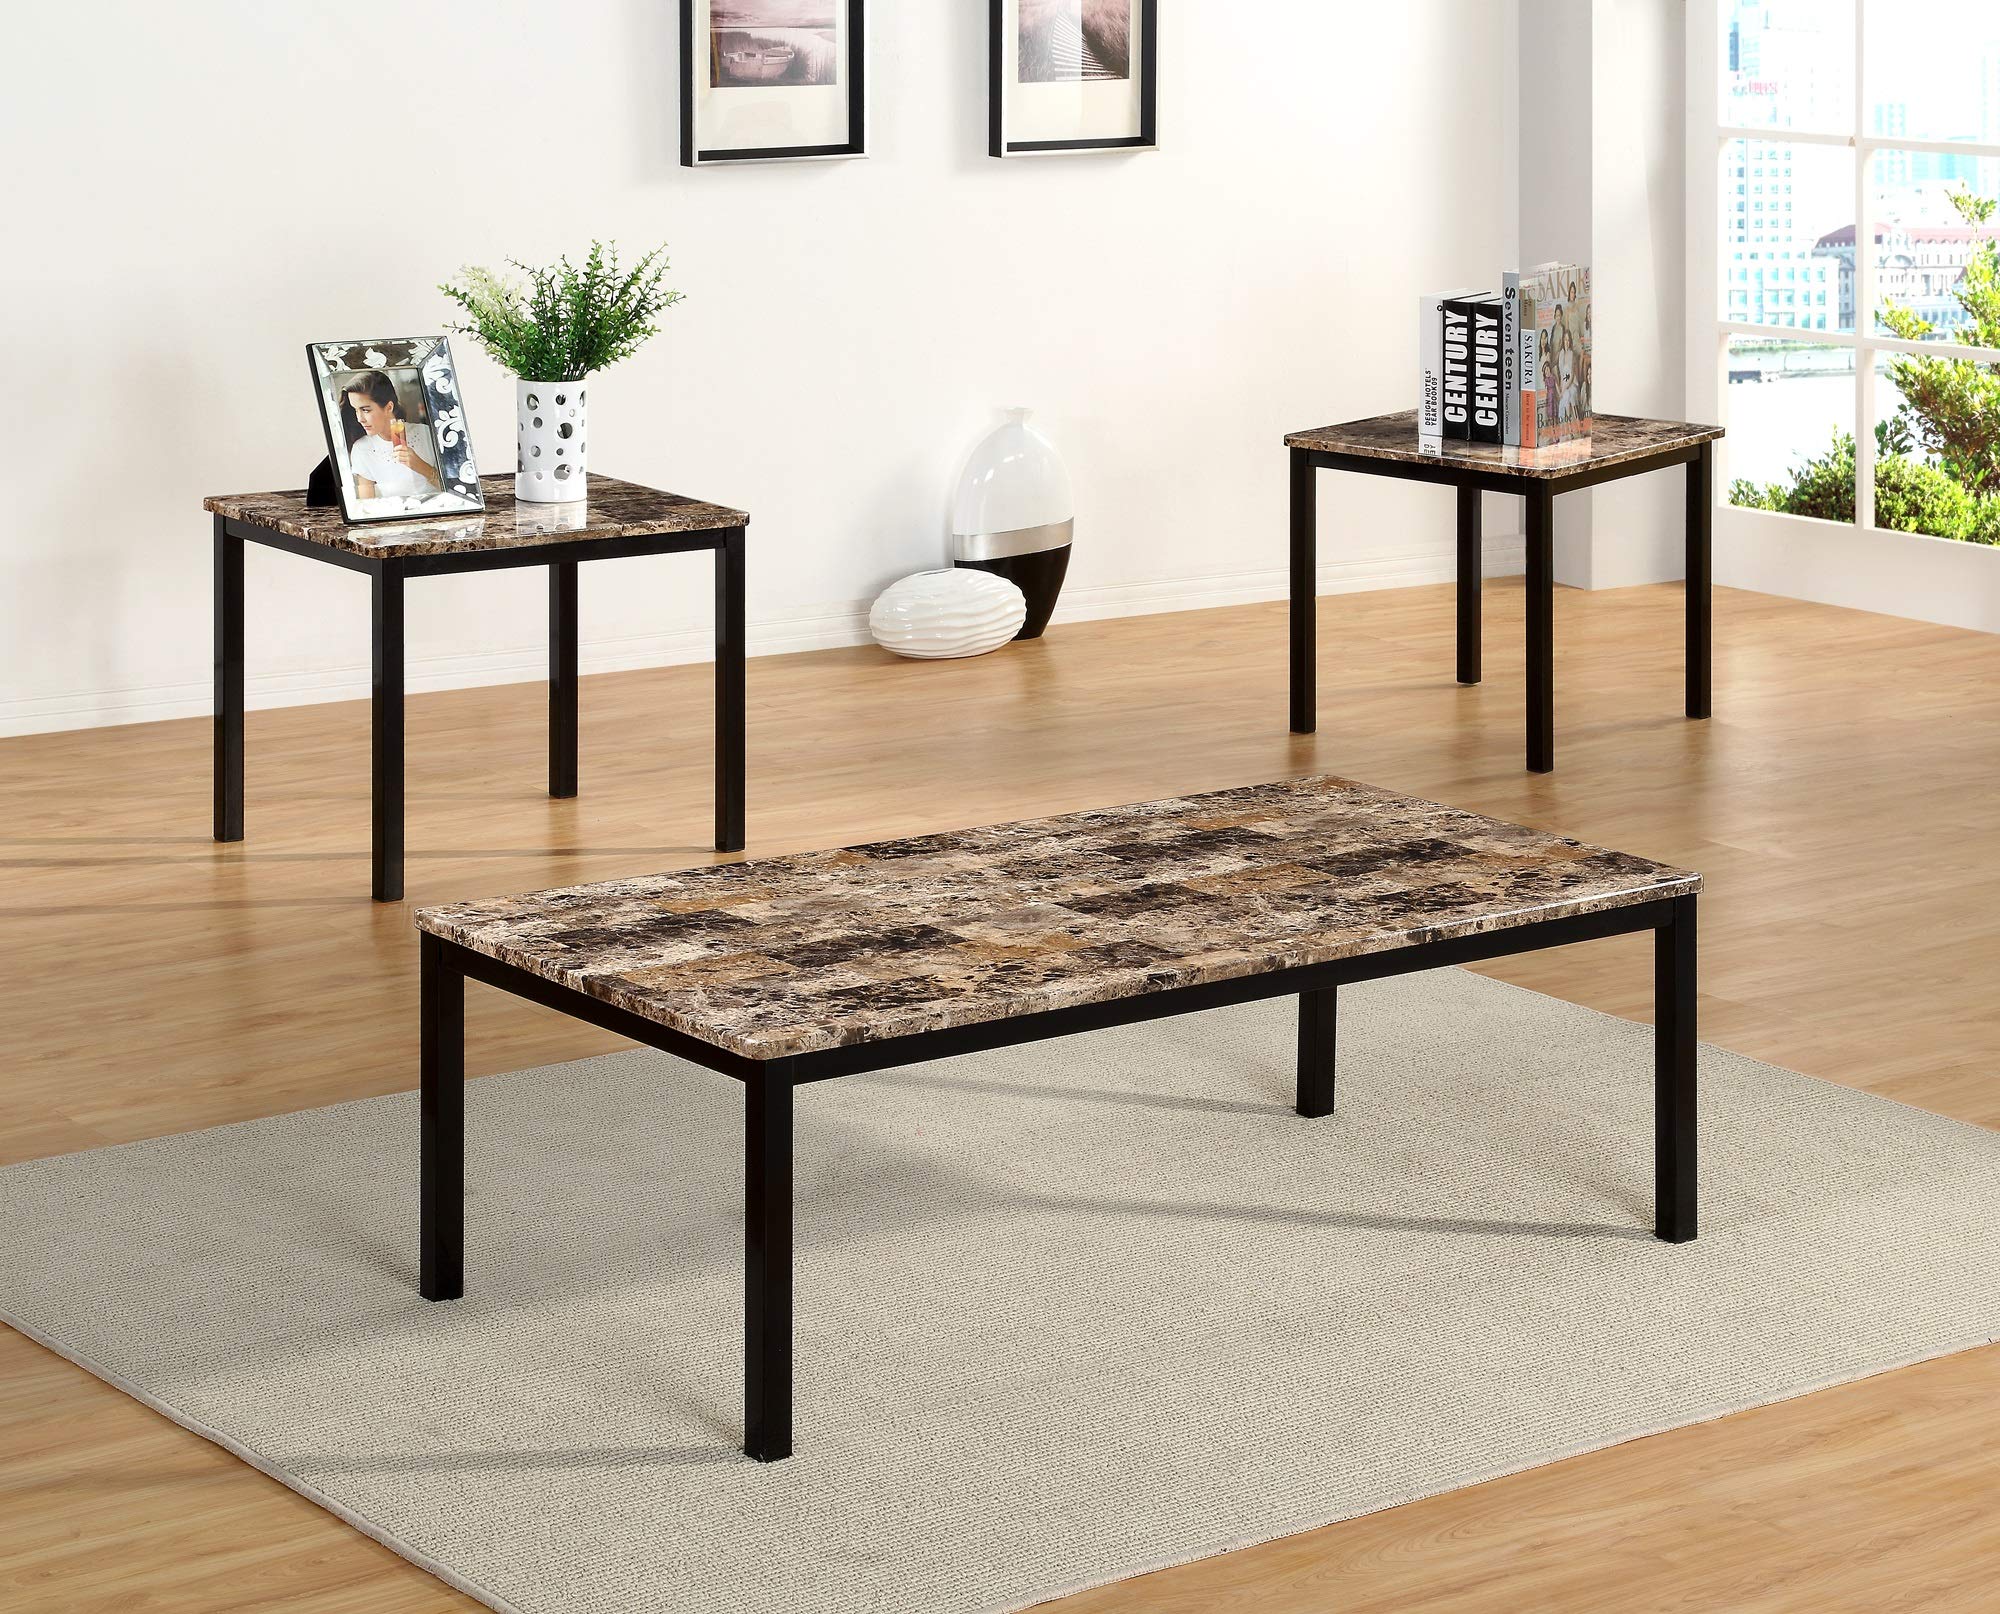 GTU Furntiure 3Pc Rectangular Faux Marble Top Living Room Coffee & End Table Set